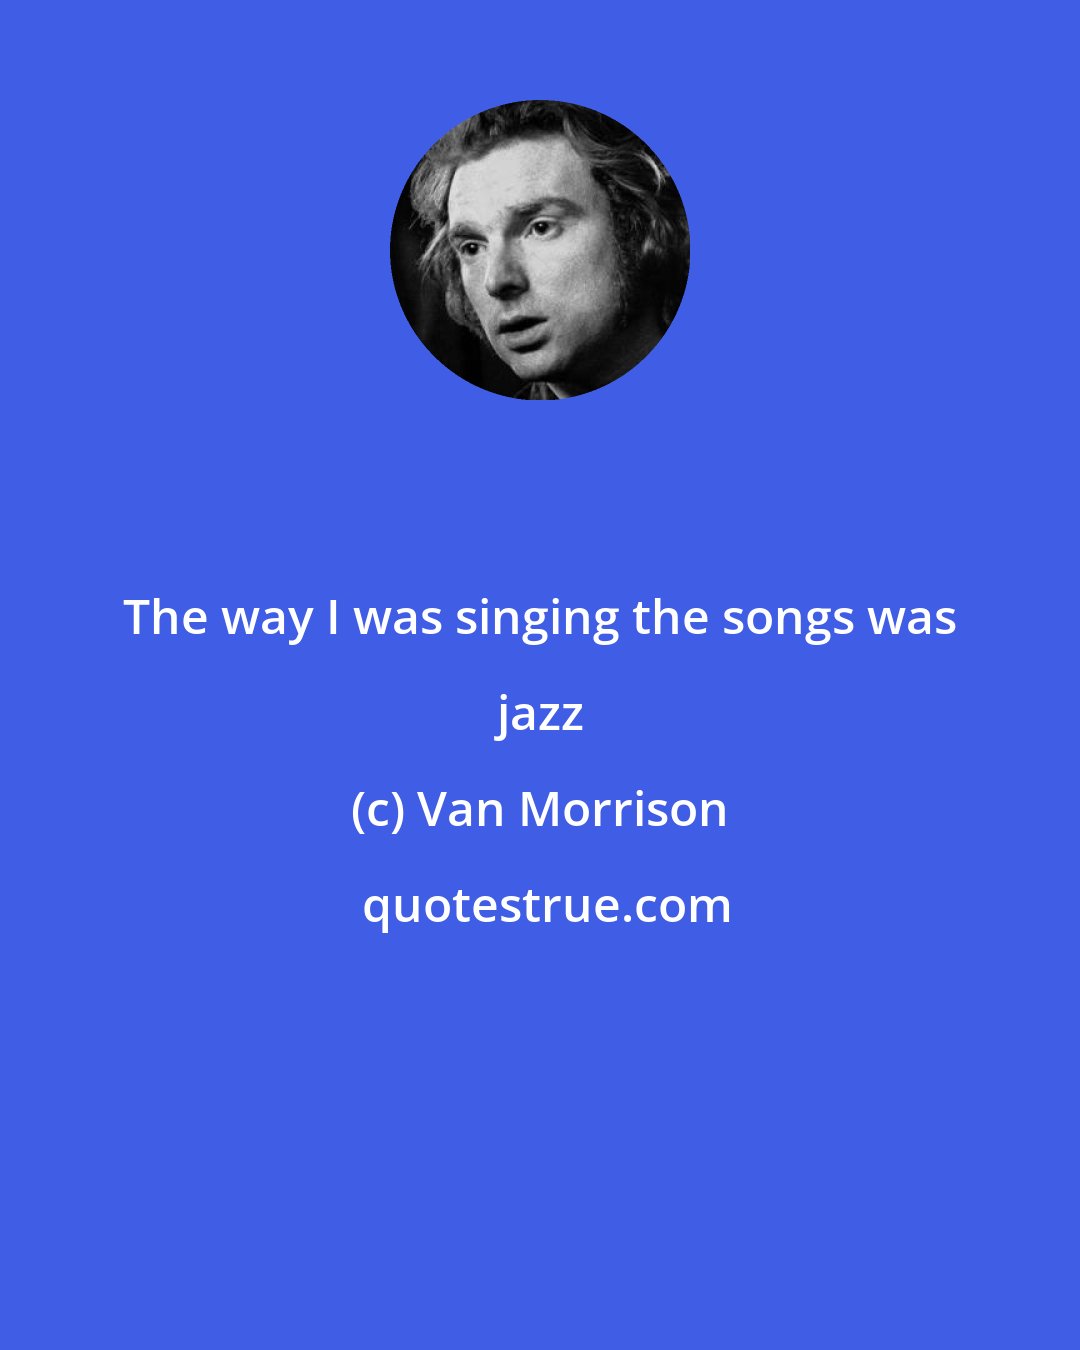 Van Morrison: The way I was singing the songs was jazz